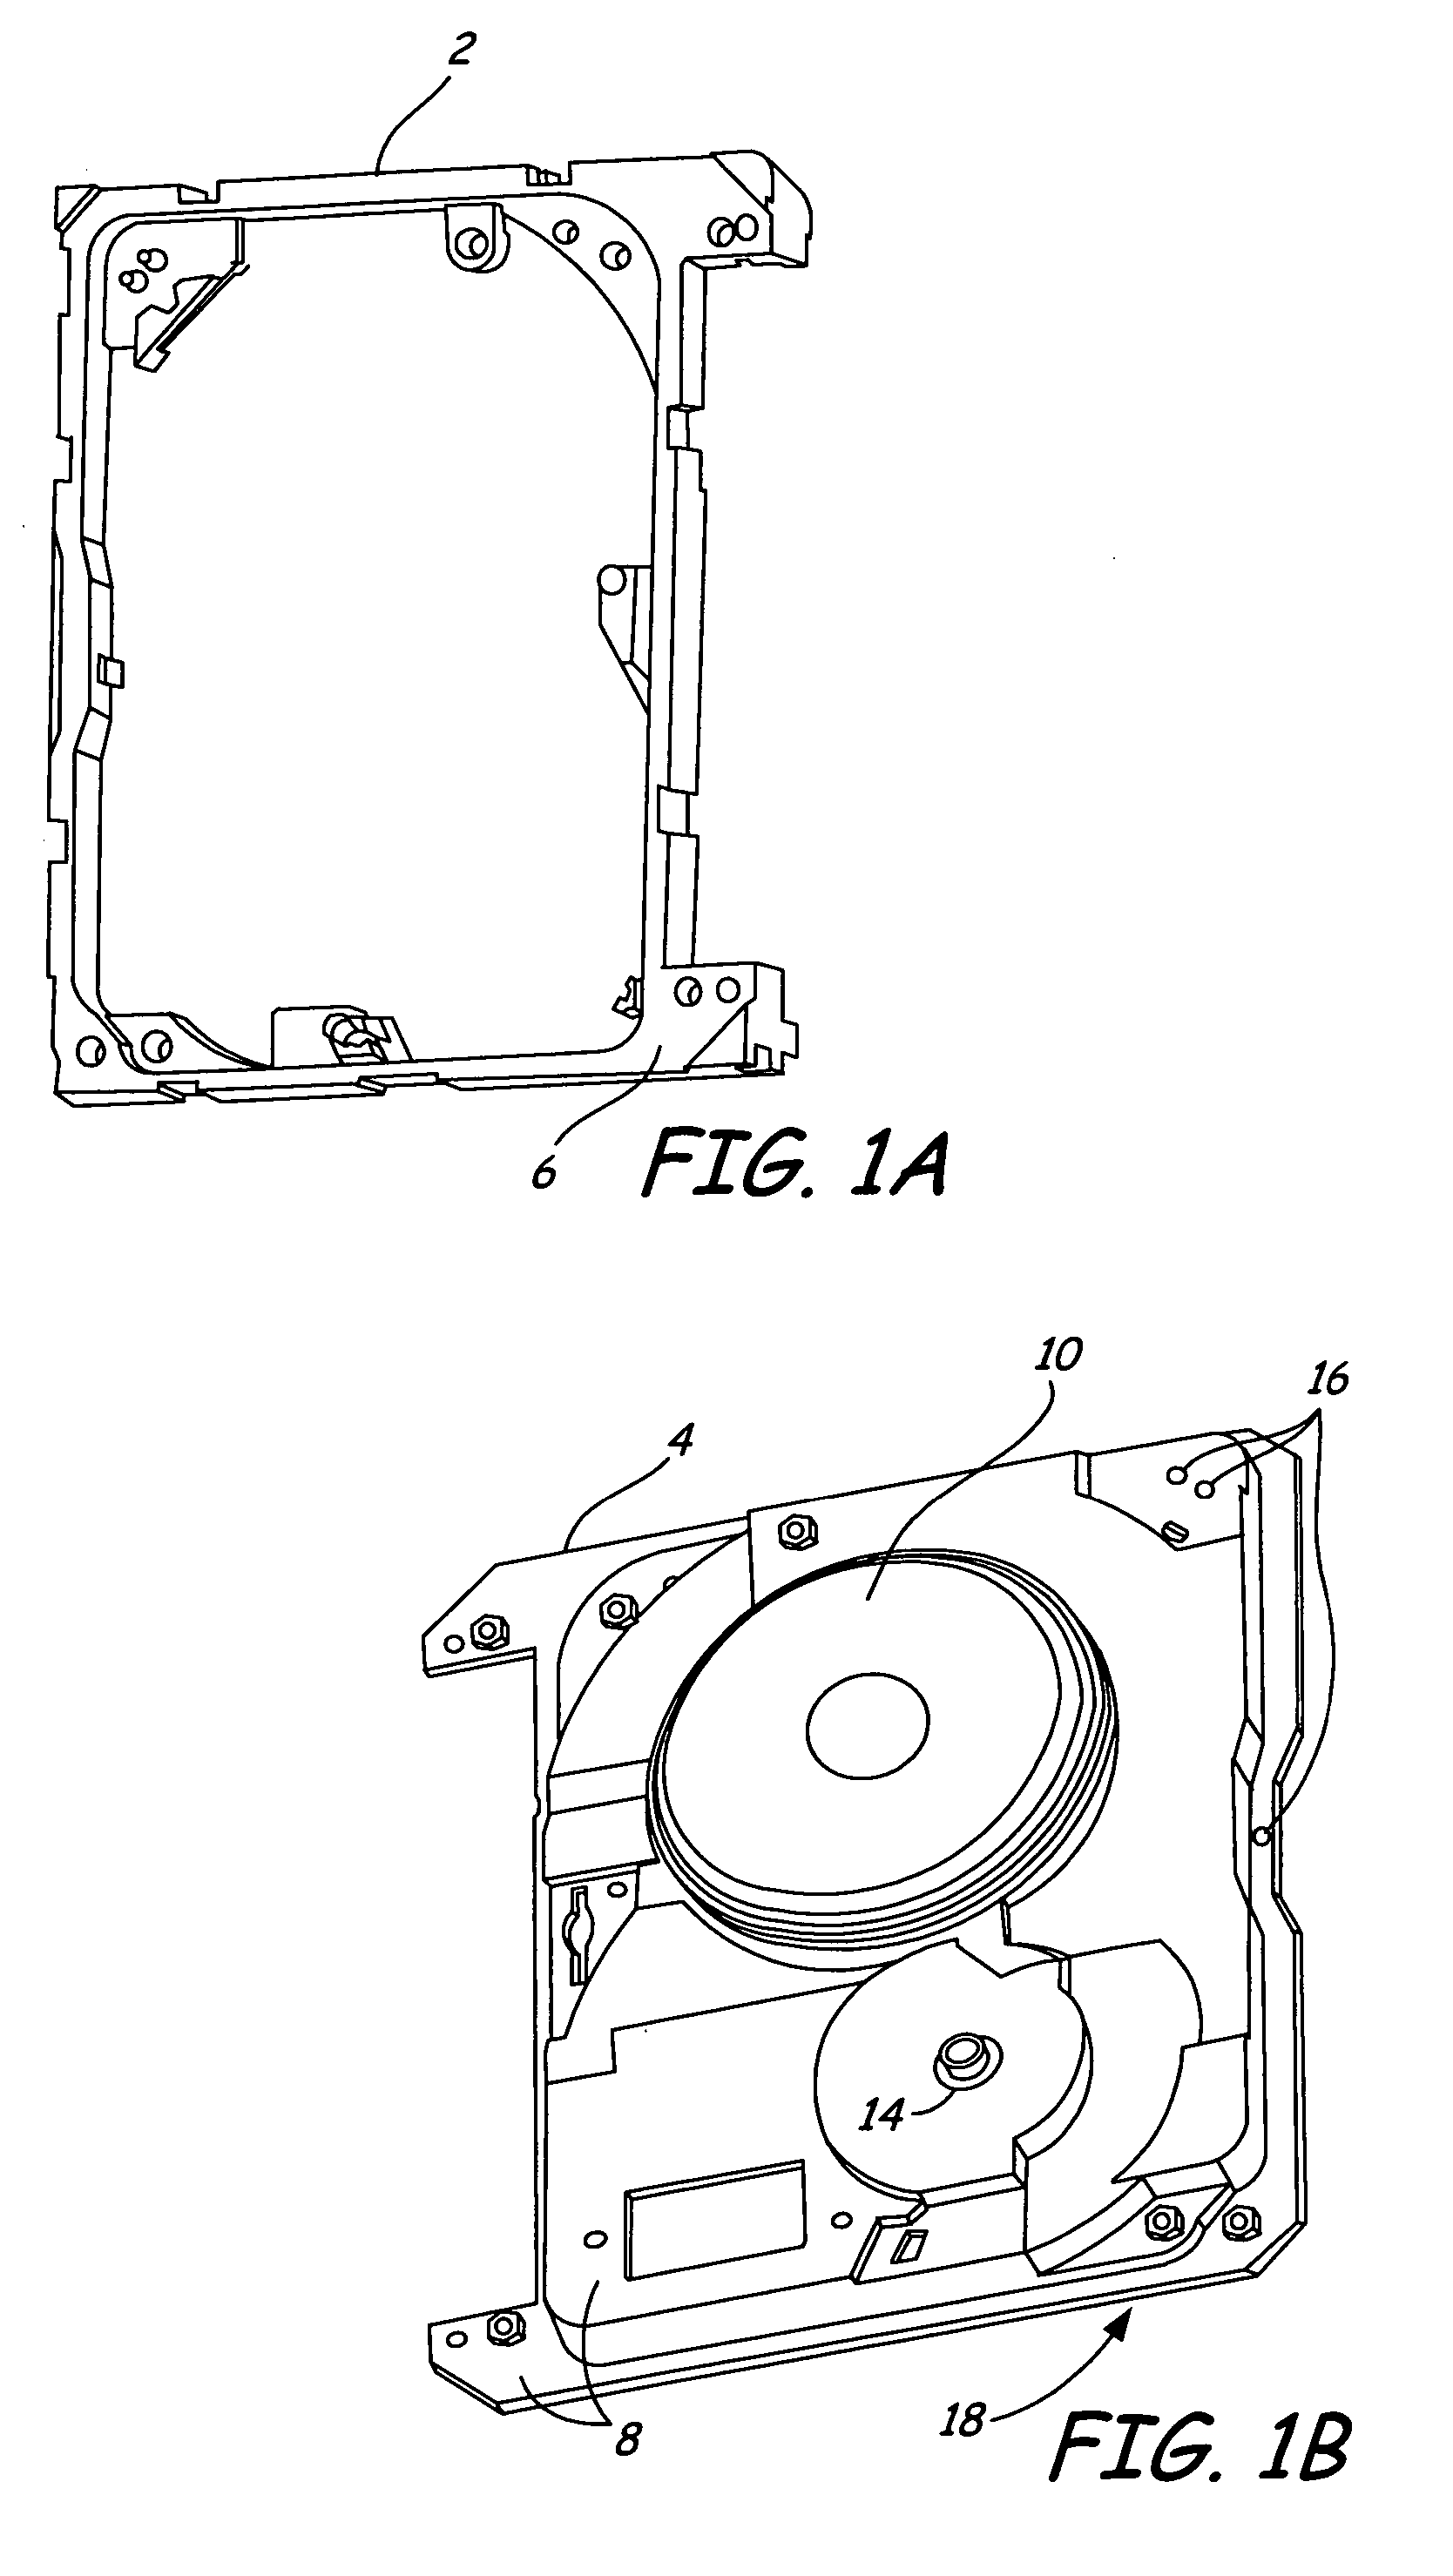 Overmold material and metal base interface design for leakage reduction in a disc drive